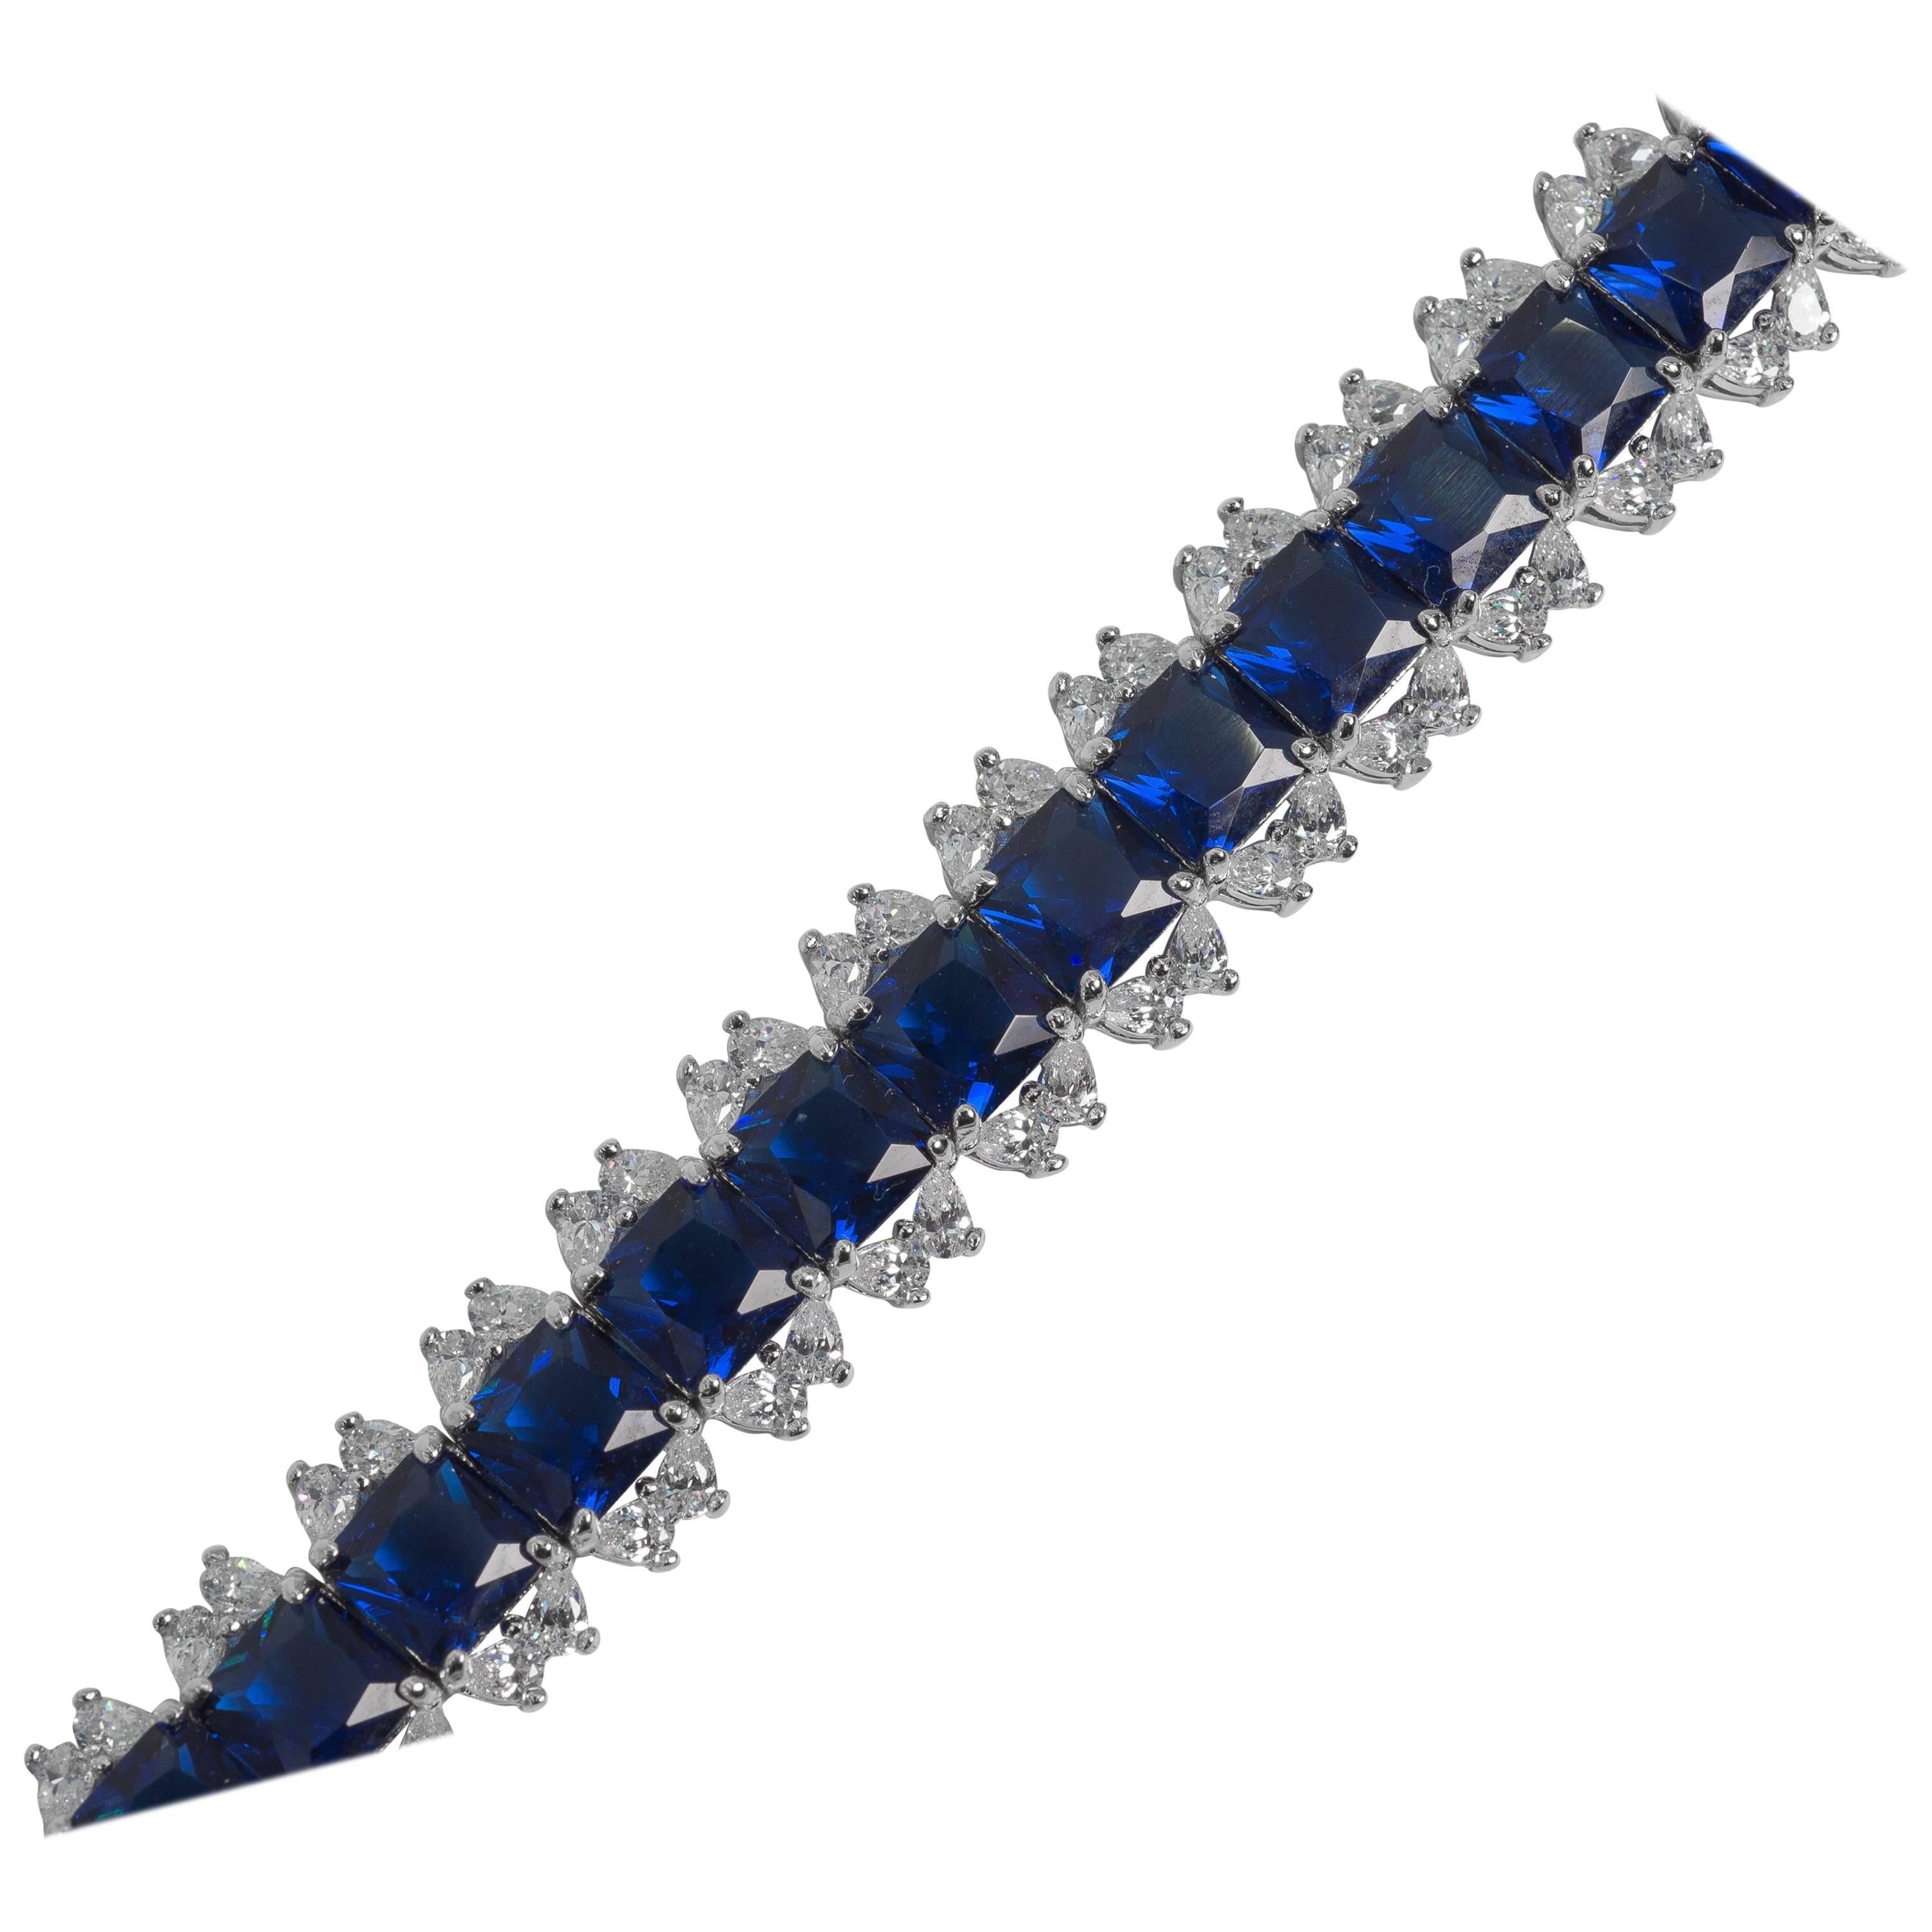 Straight line bracelet of man made 1 carat Burma sapphires edged with cubic zirconia totally flexible secure clasp hand set in rhodium sterling seven inches long by half inch wide.